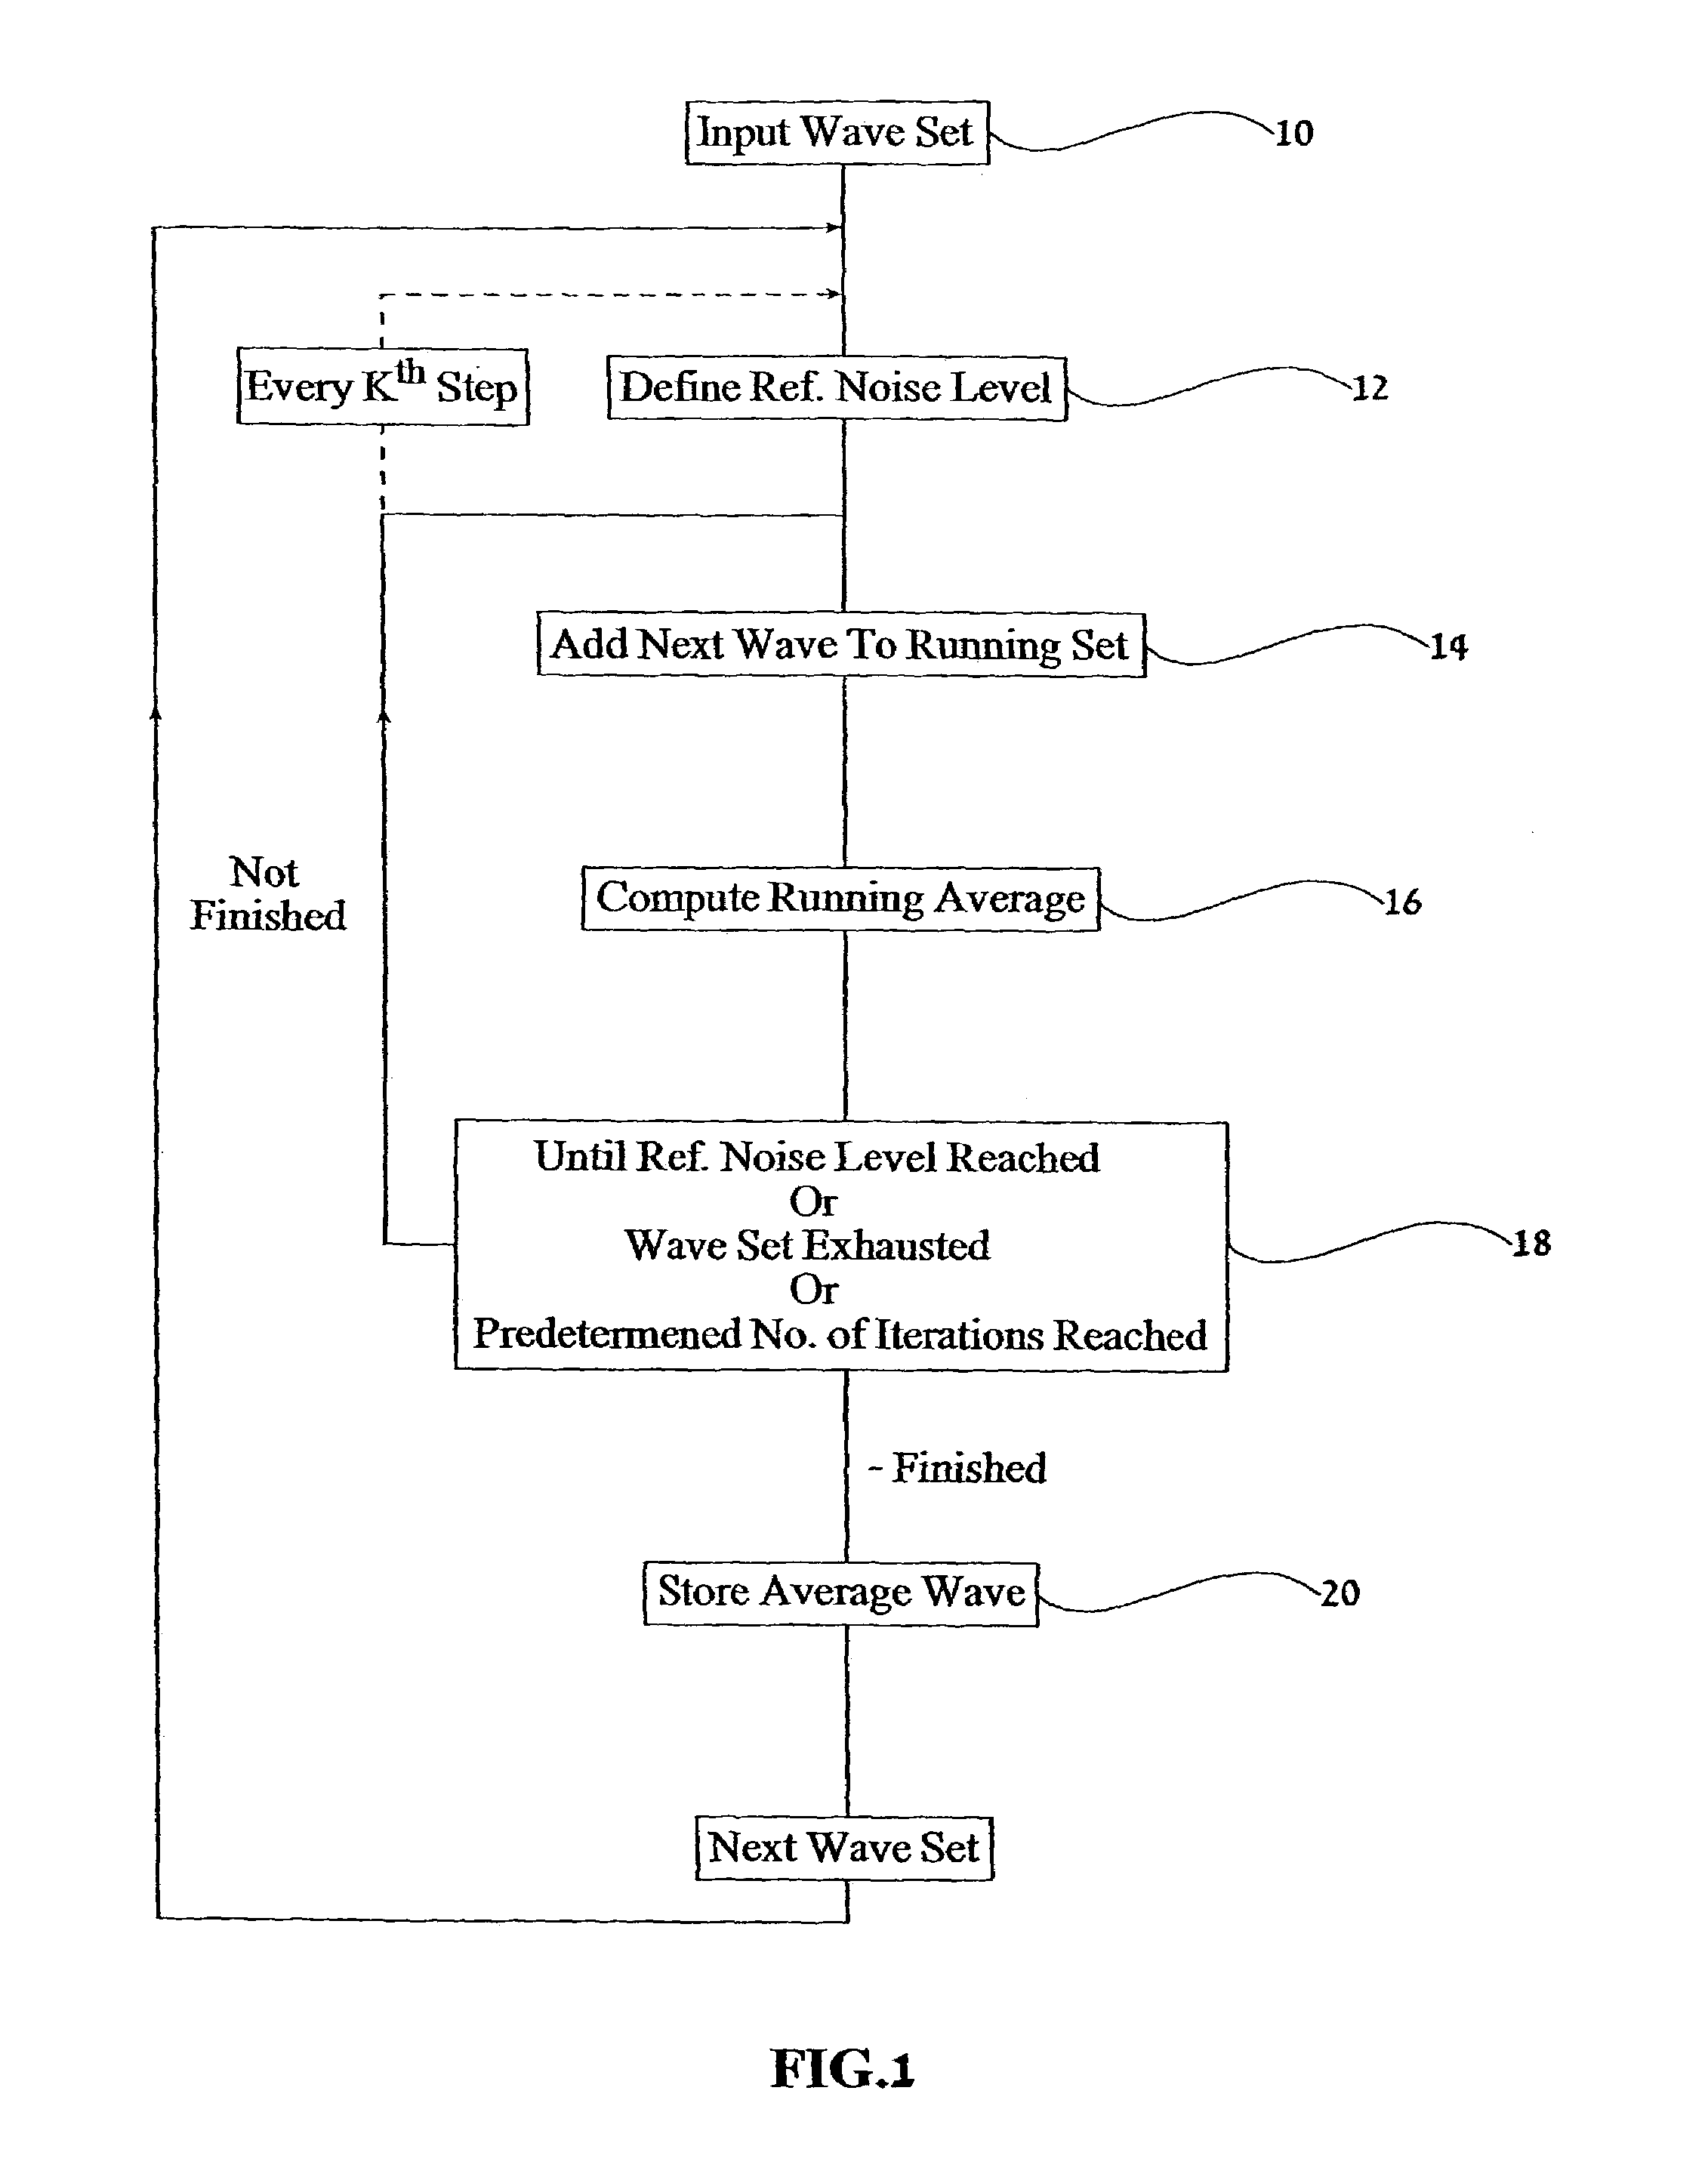 Method and device for analyzing a periodic or semi-periodic signal